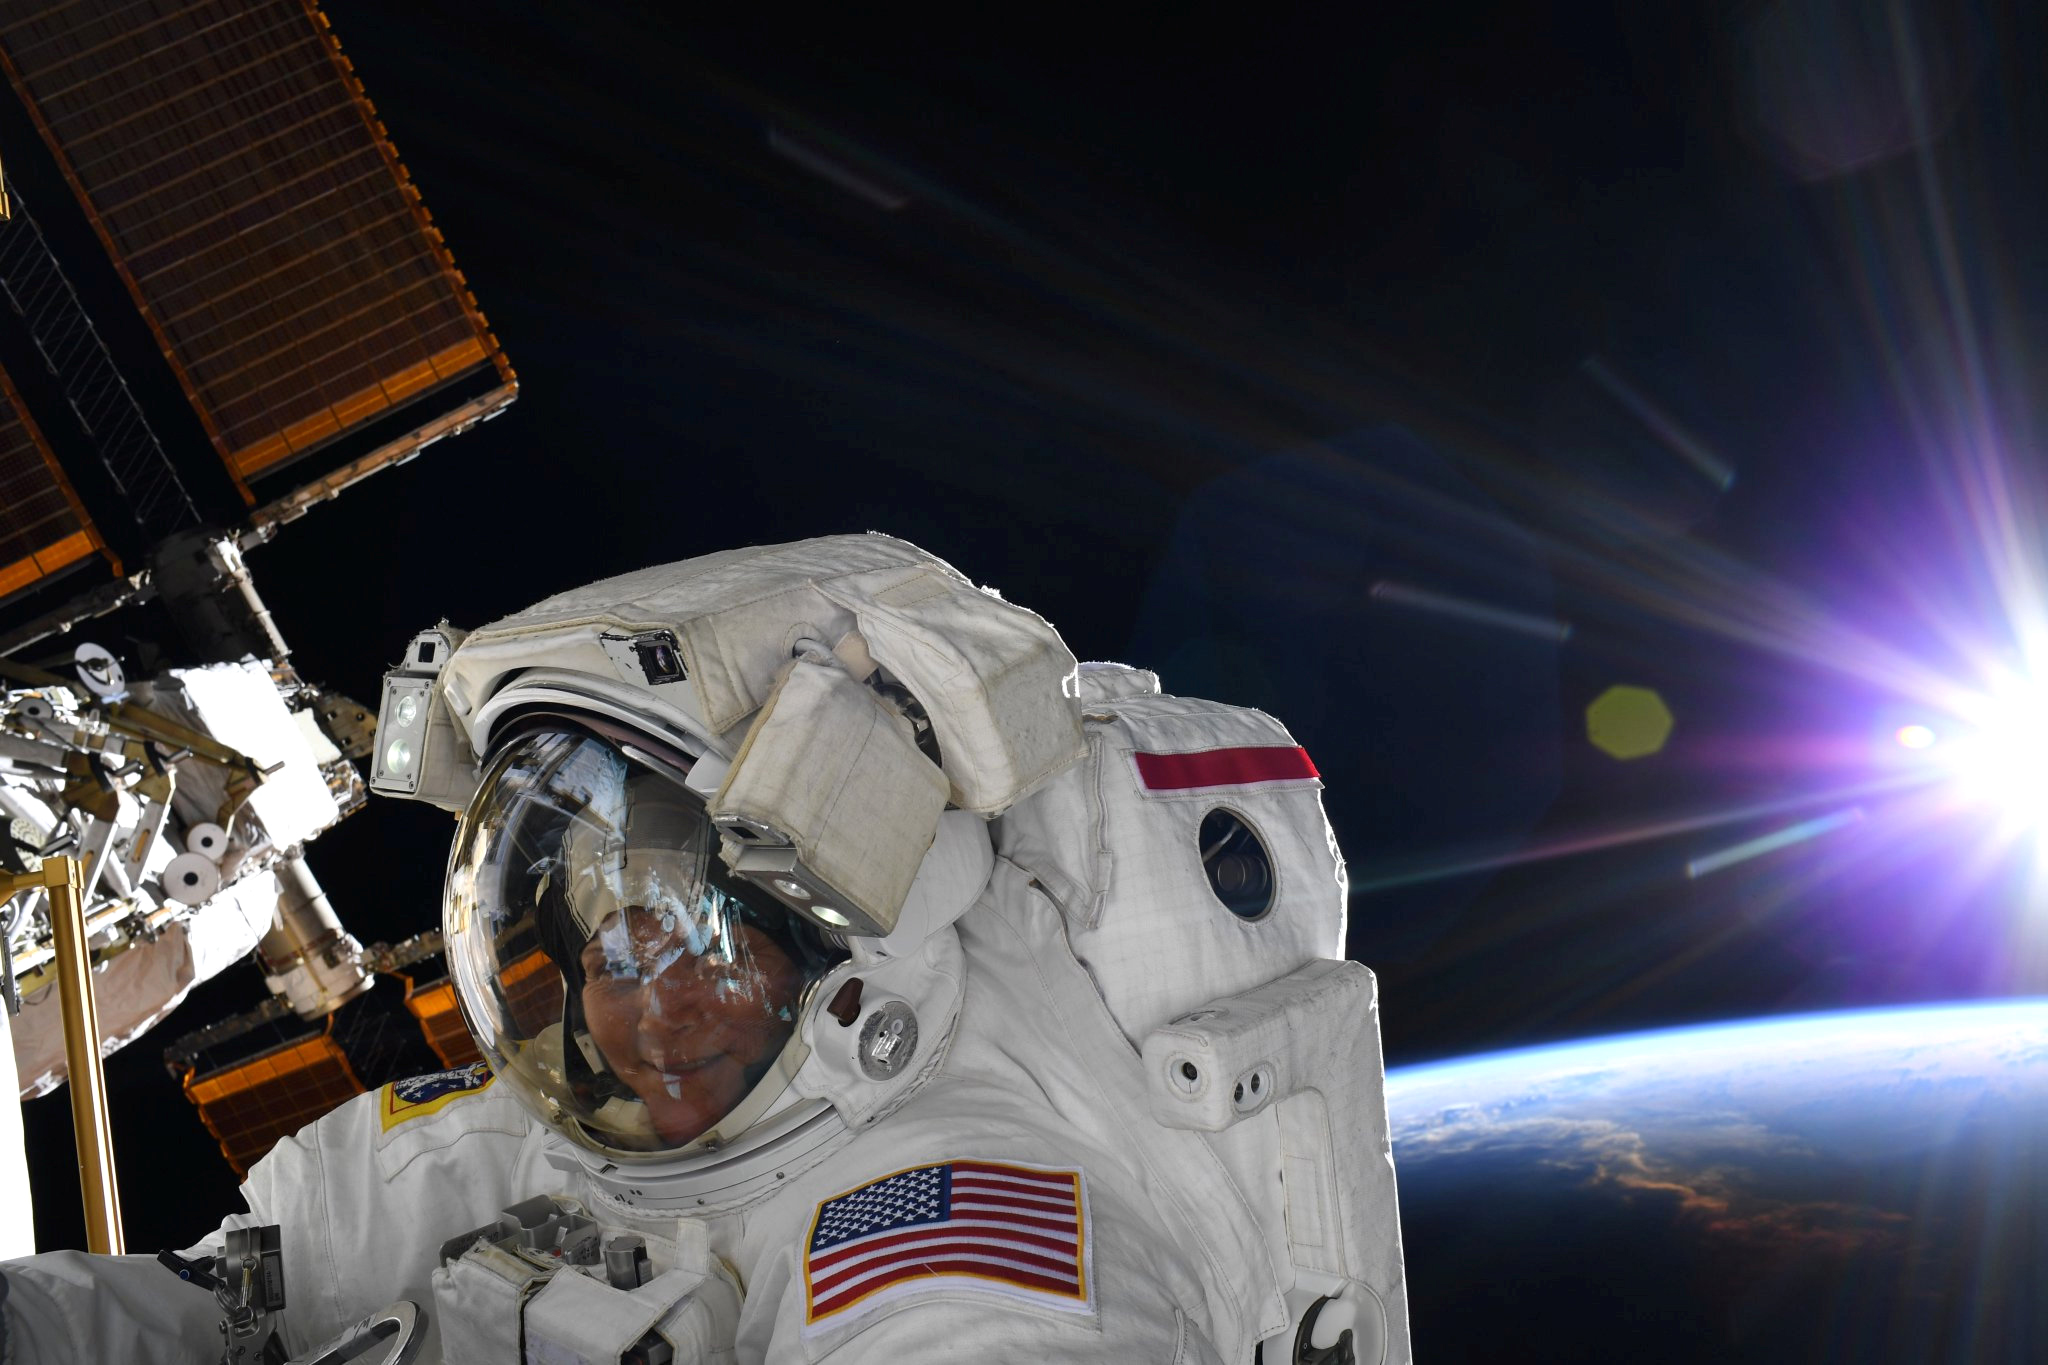 PHOTO: NASA astronaut Anne McClain is seen during a spacewalk at the International Space Station in this social media photo, March 22, 2019.